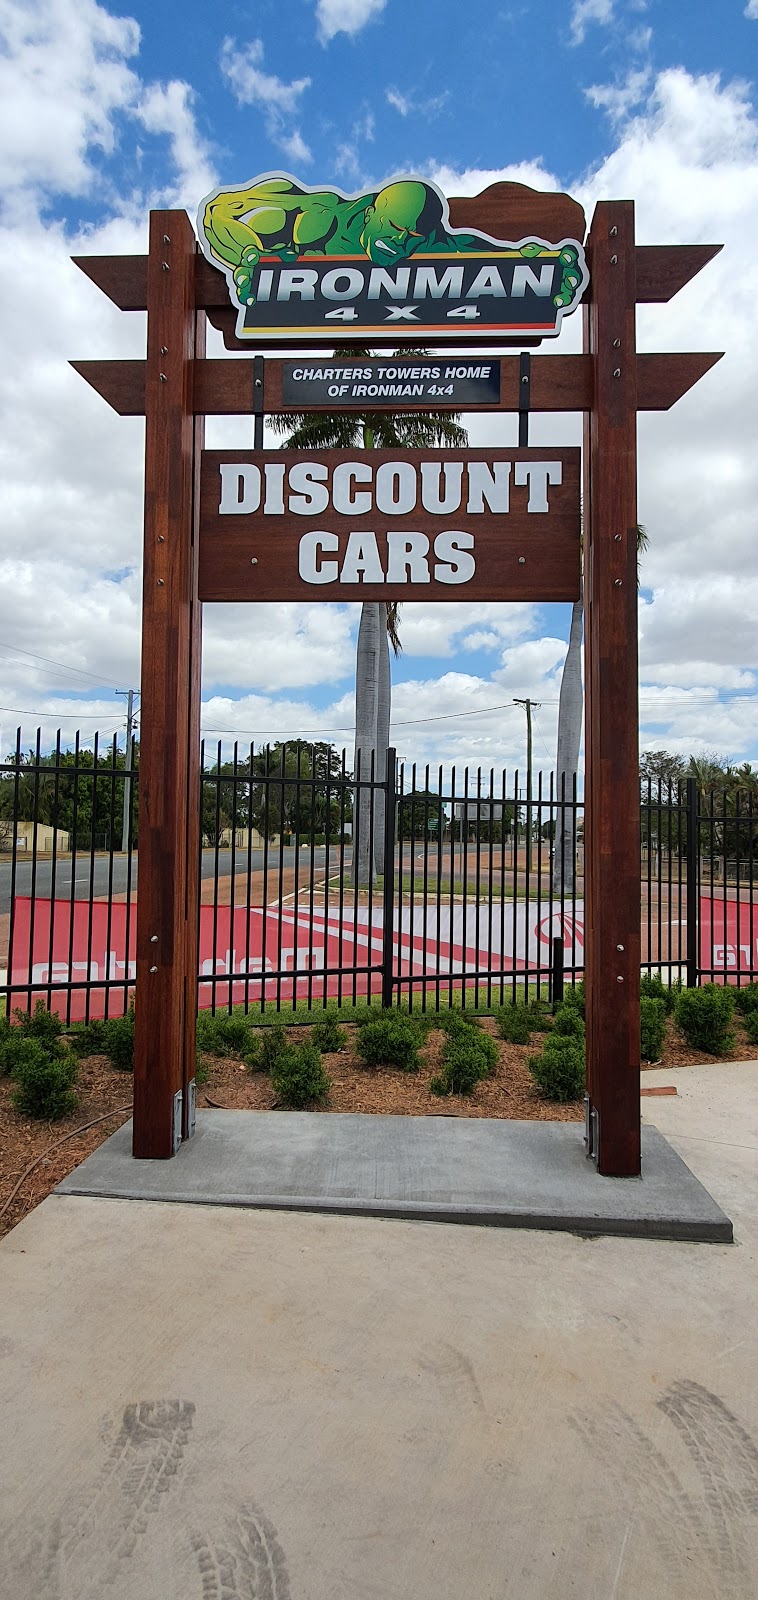 Charters Towers Toyota | car dealer | York St &, Millchester Rd, Queenton QLD 4820, Australia | 0747545600 OR +61 7 4754 5600